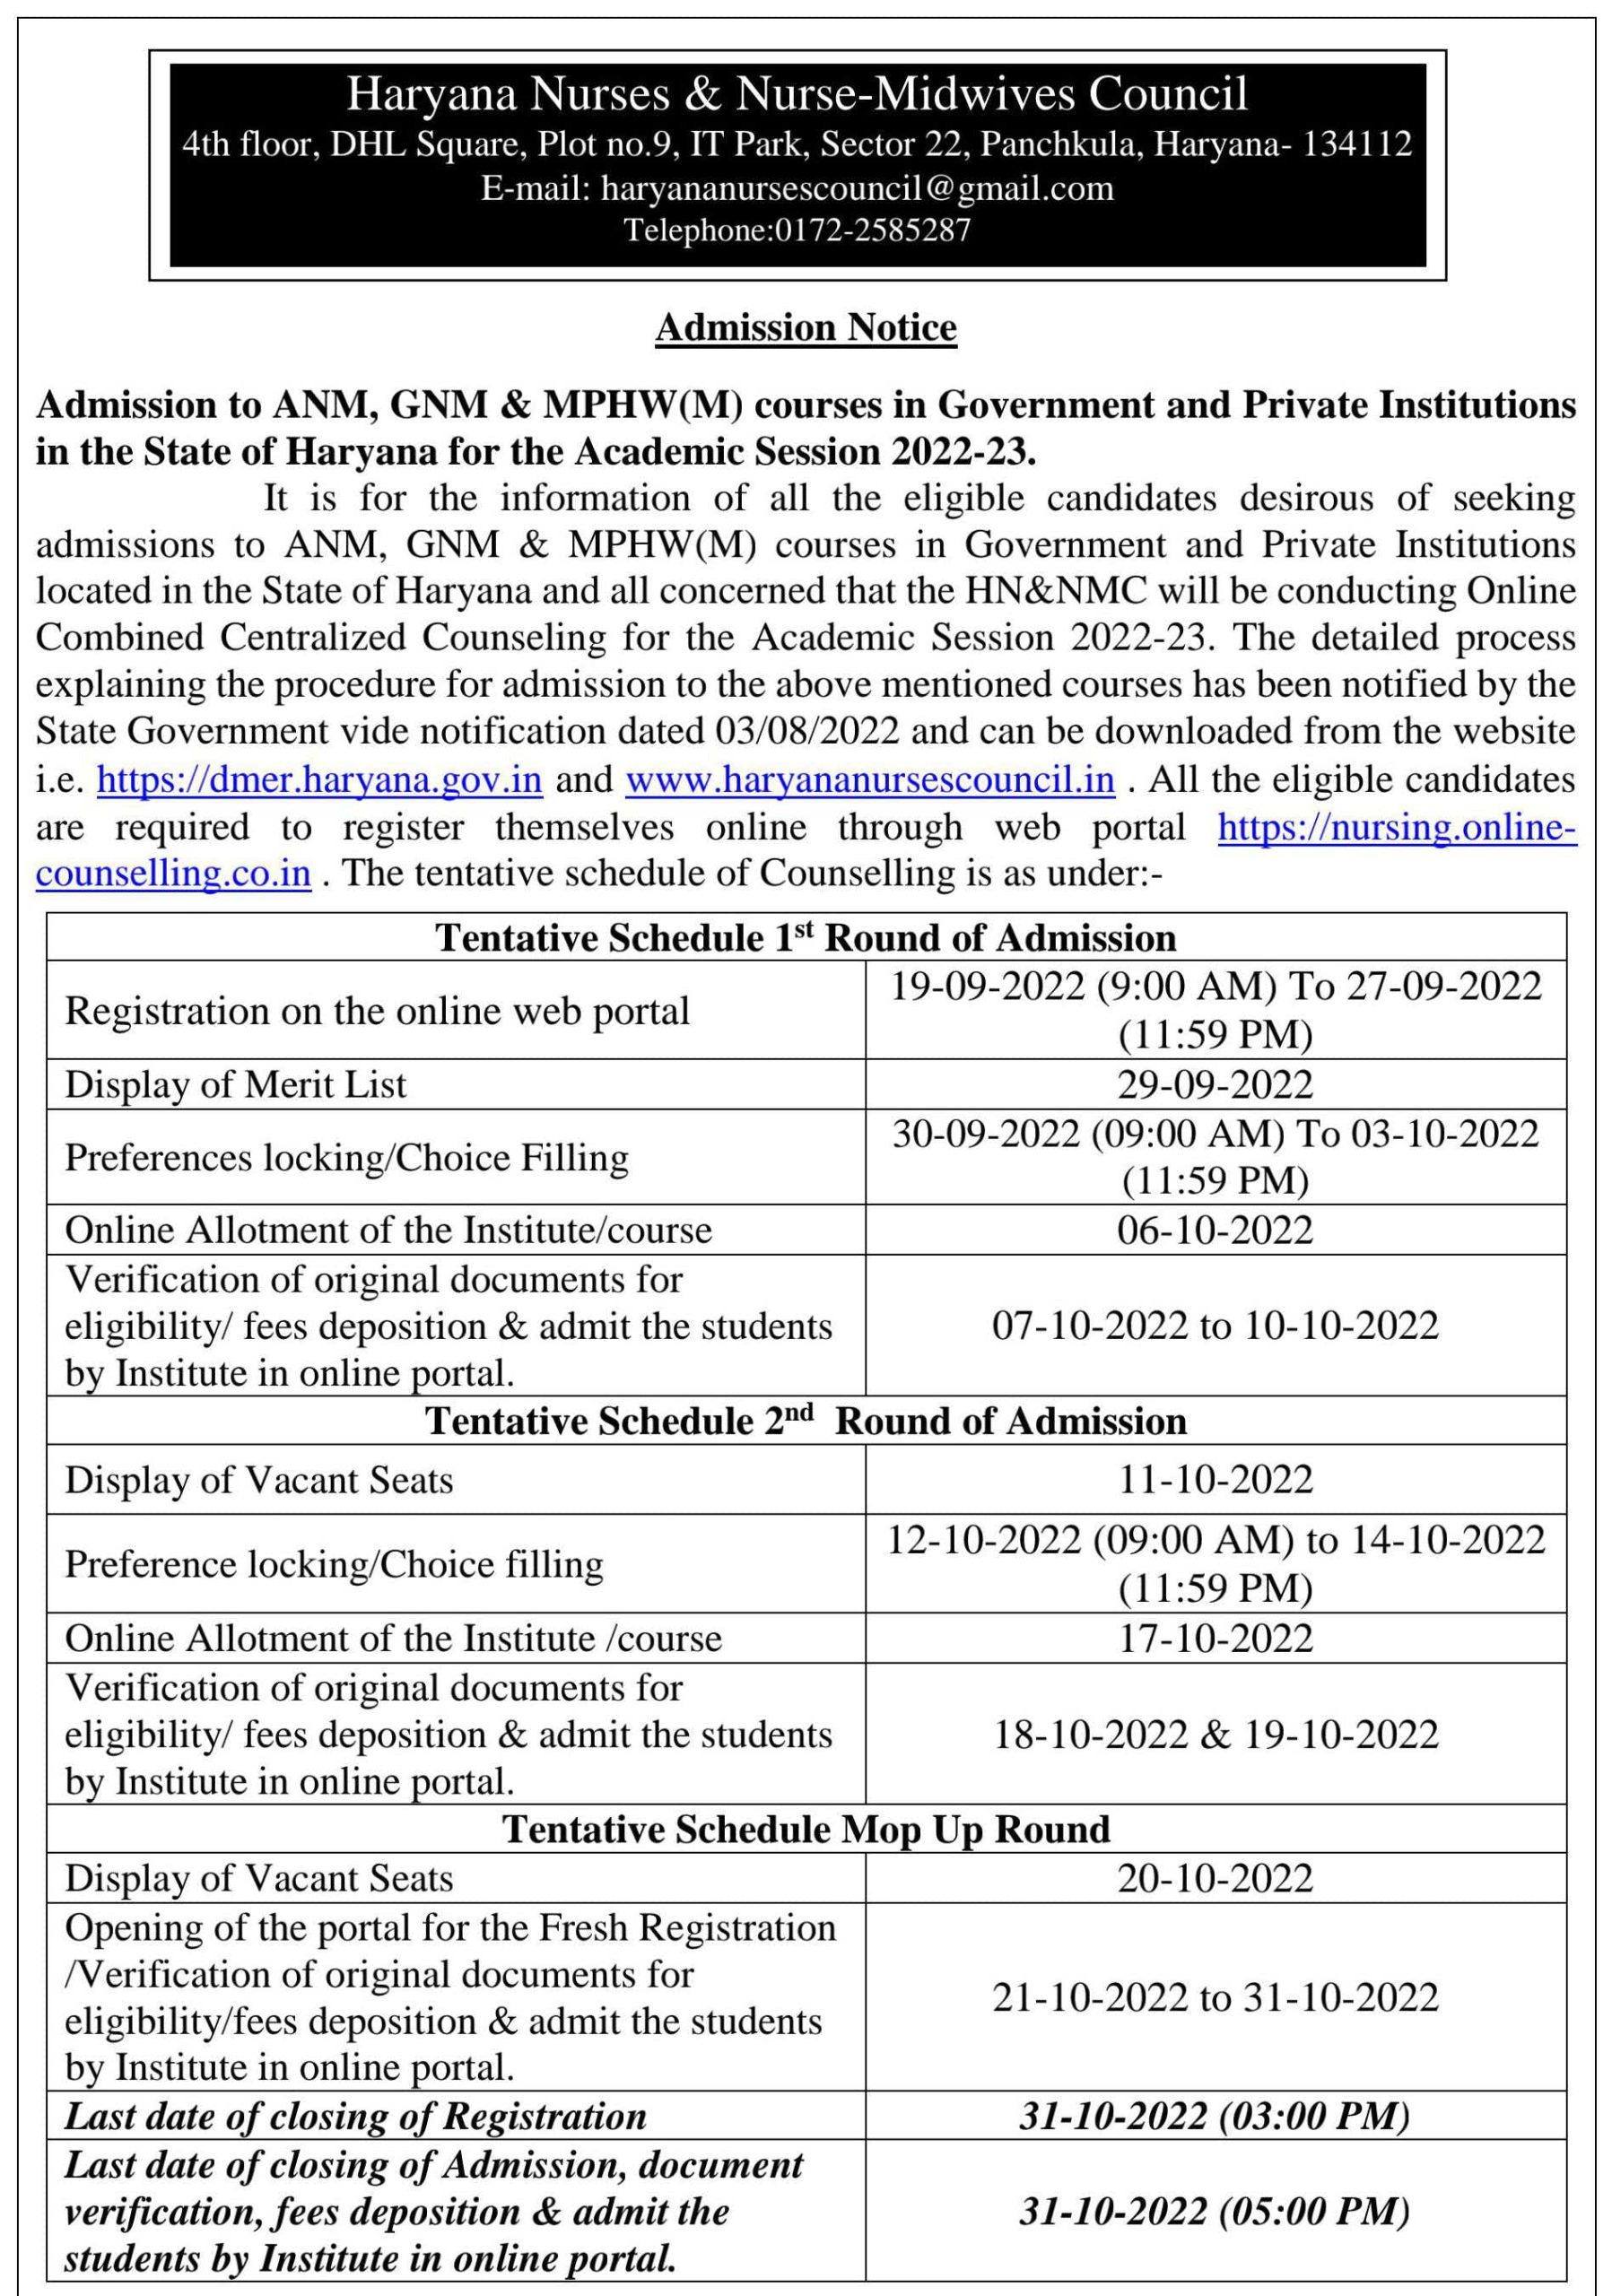 Haryana ANM, GNM & MPHW Online Admission Form 2022-23